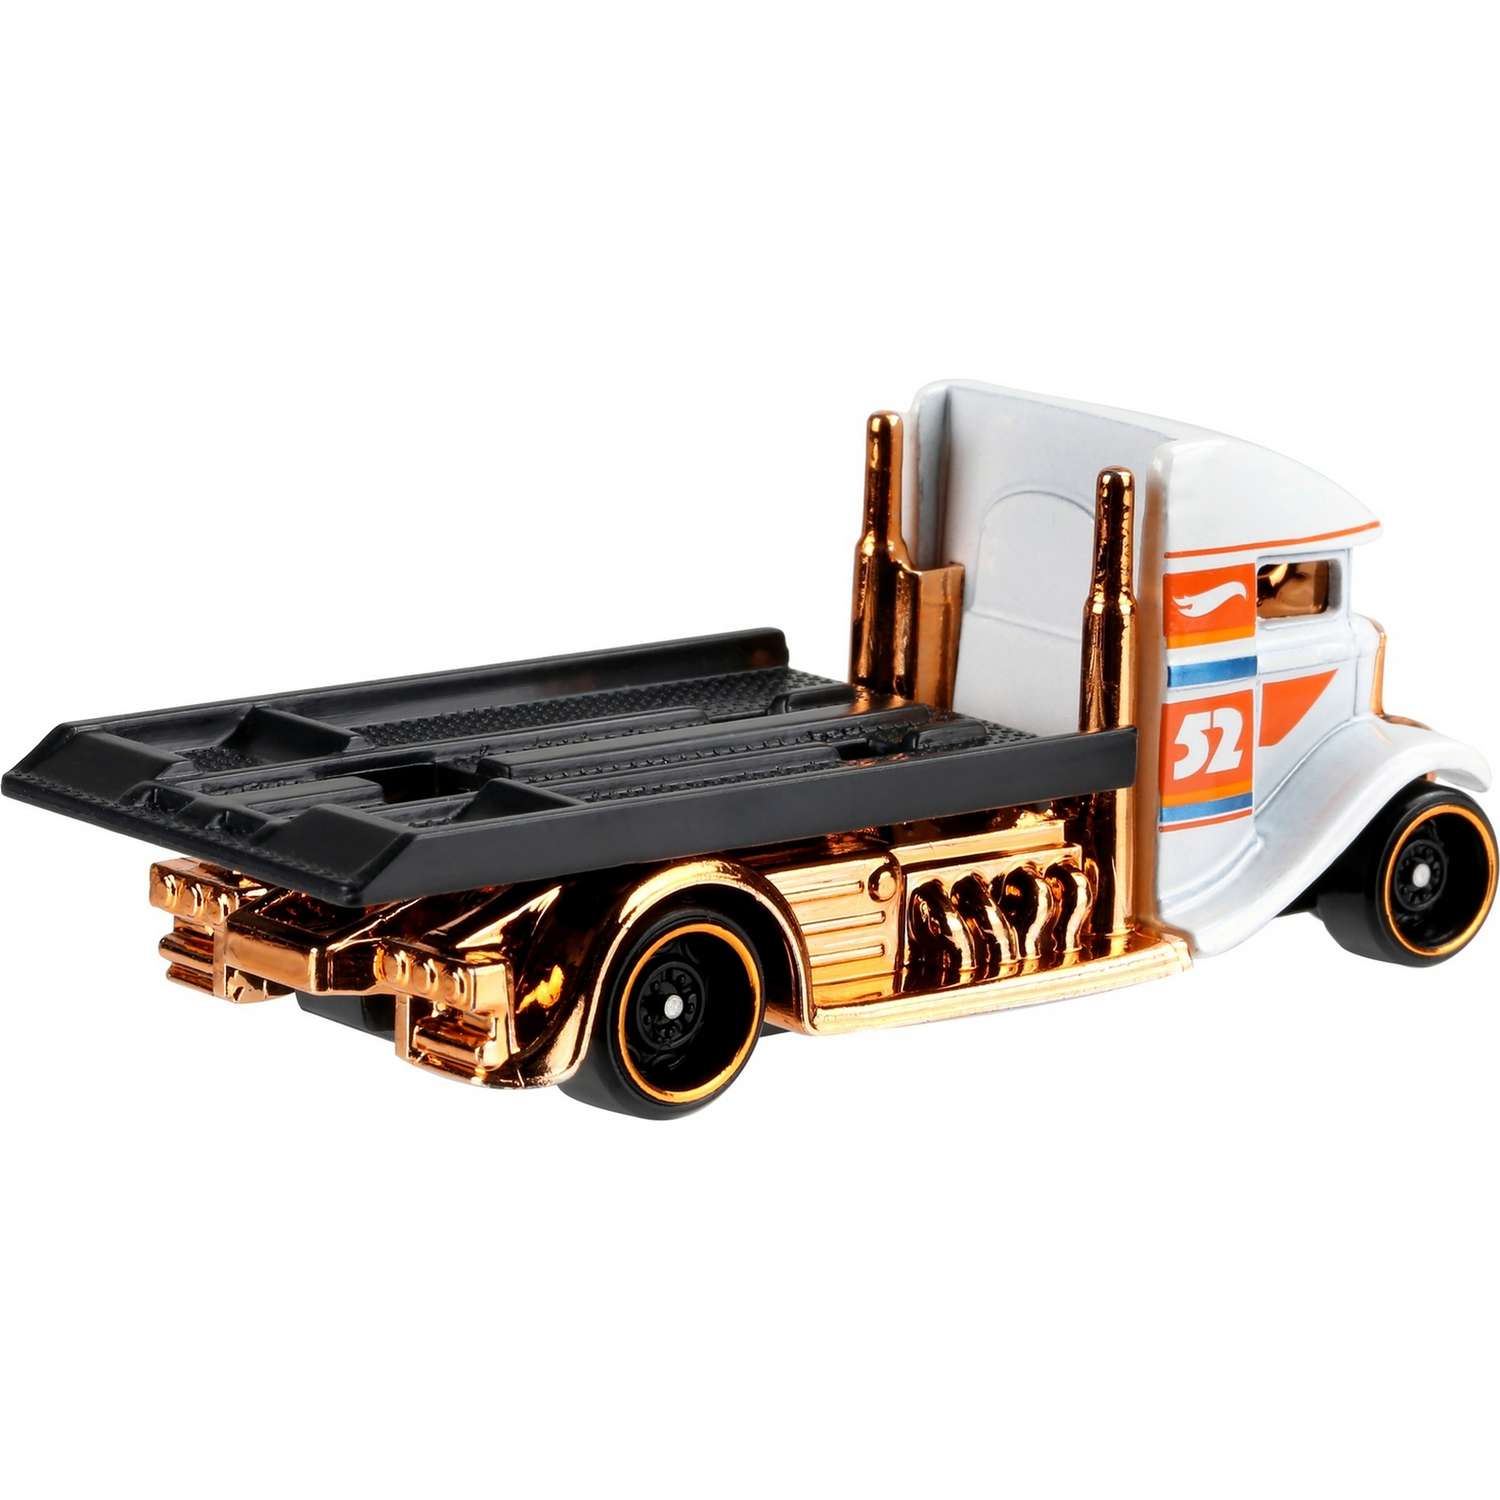 Fast bed. Машинка hot Wheels fast Bed Hauler. Машинка hot Wheels перламутр и хром. Fast-Bed Hauler hot Wheels кастом. Fast Bed Hauler модель.